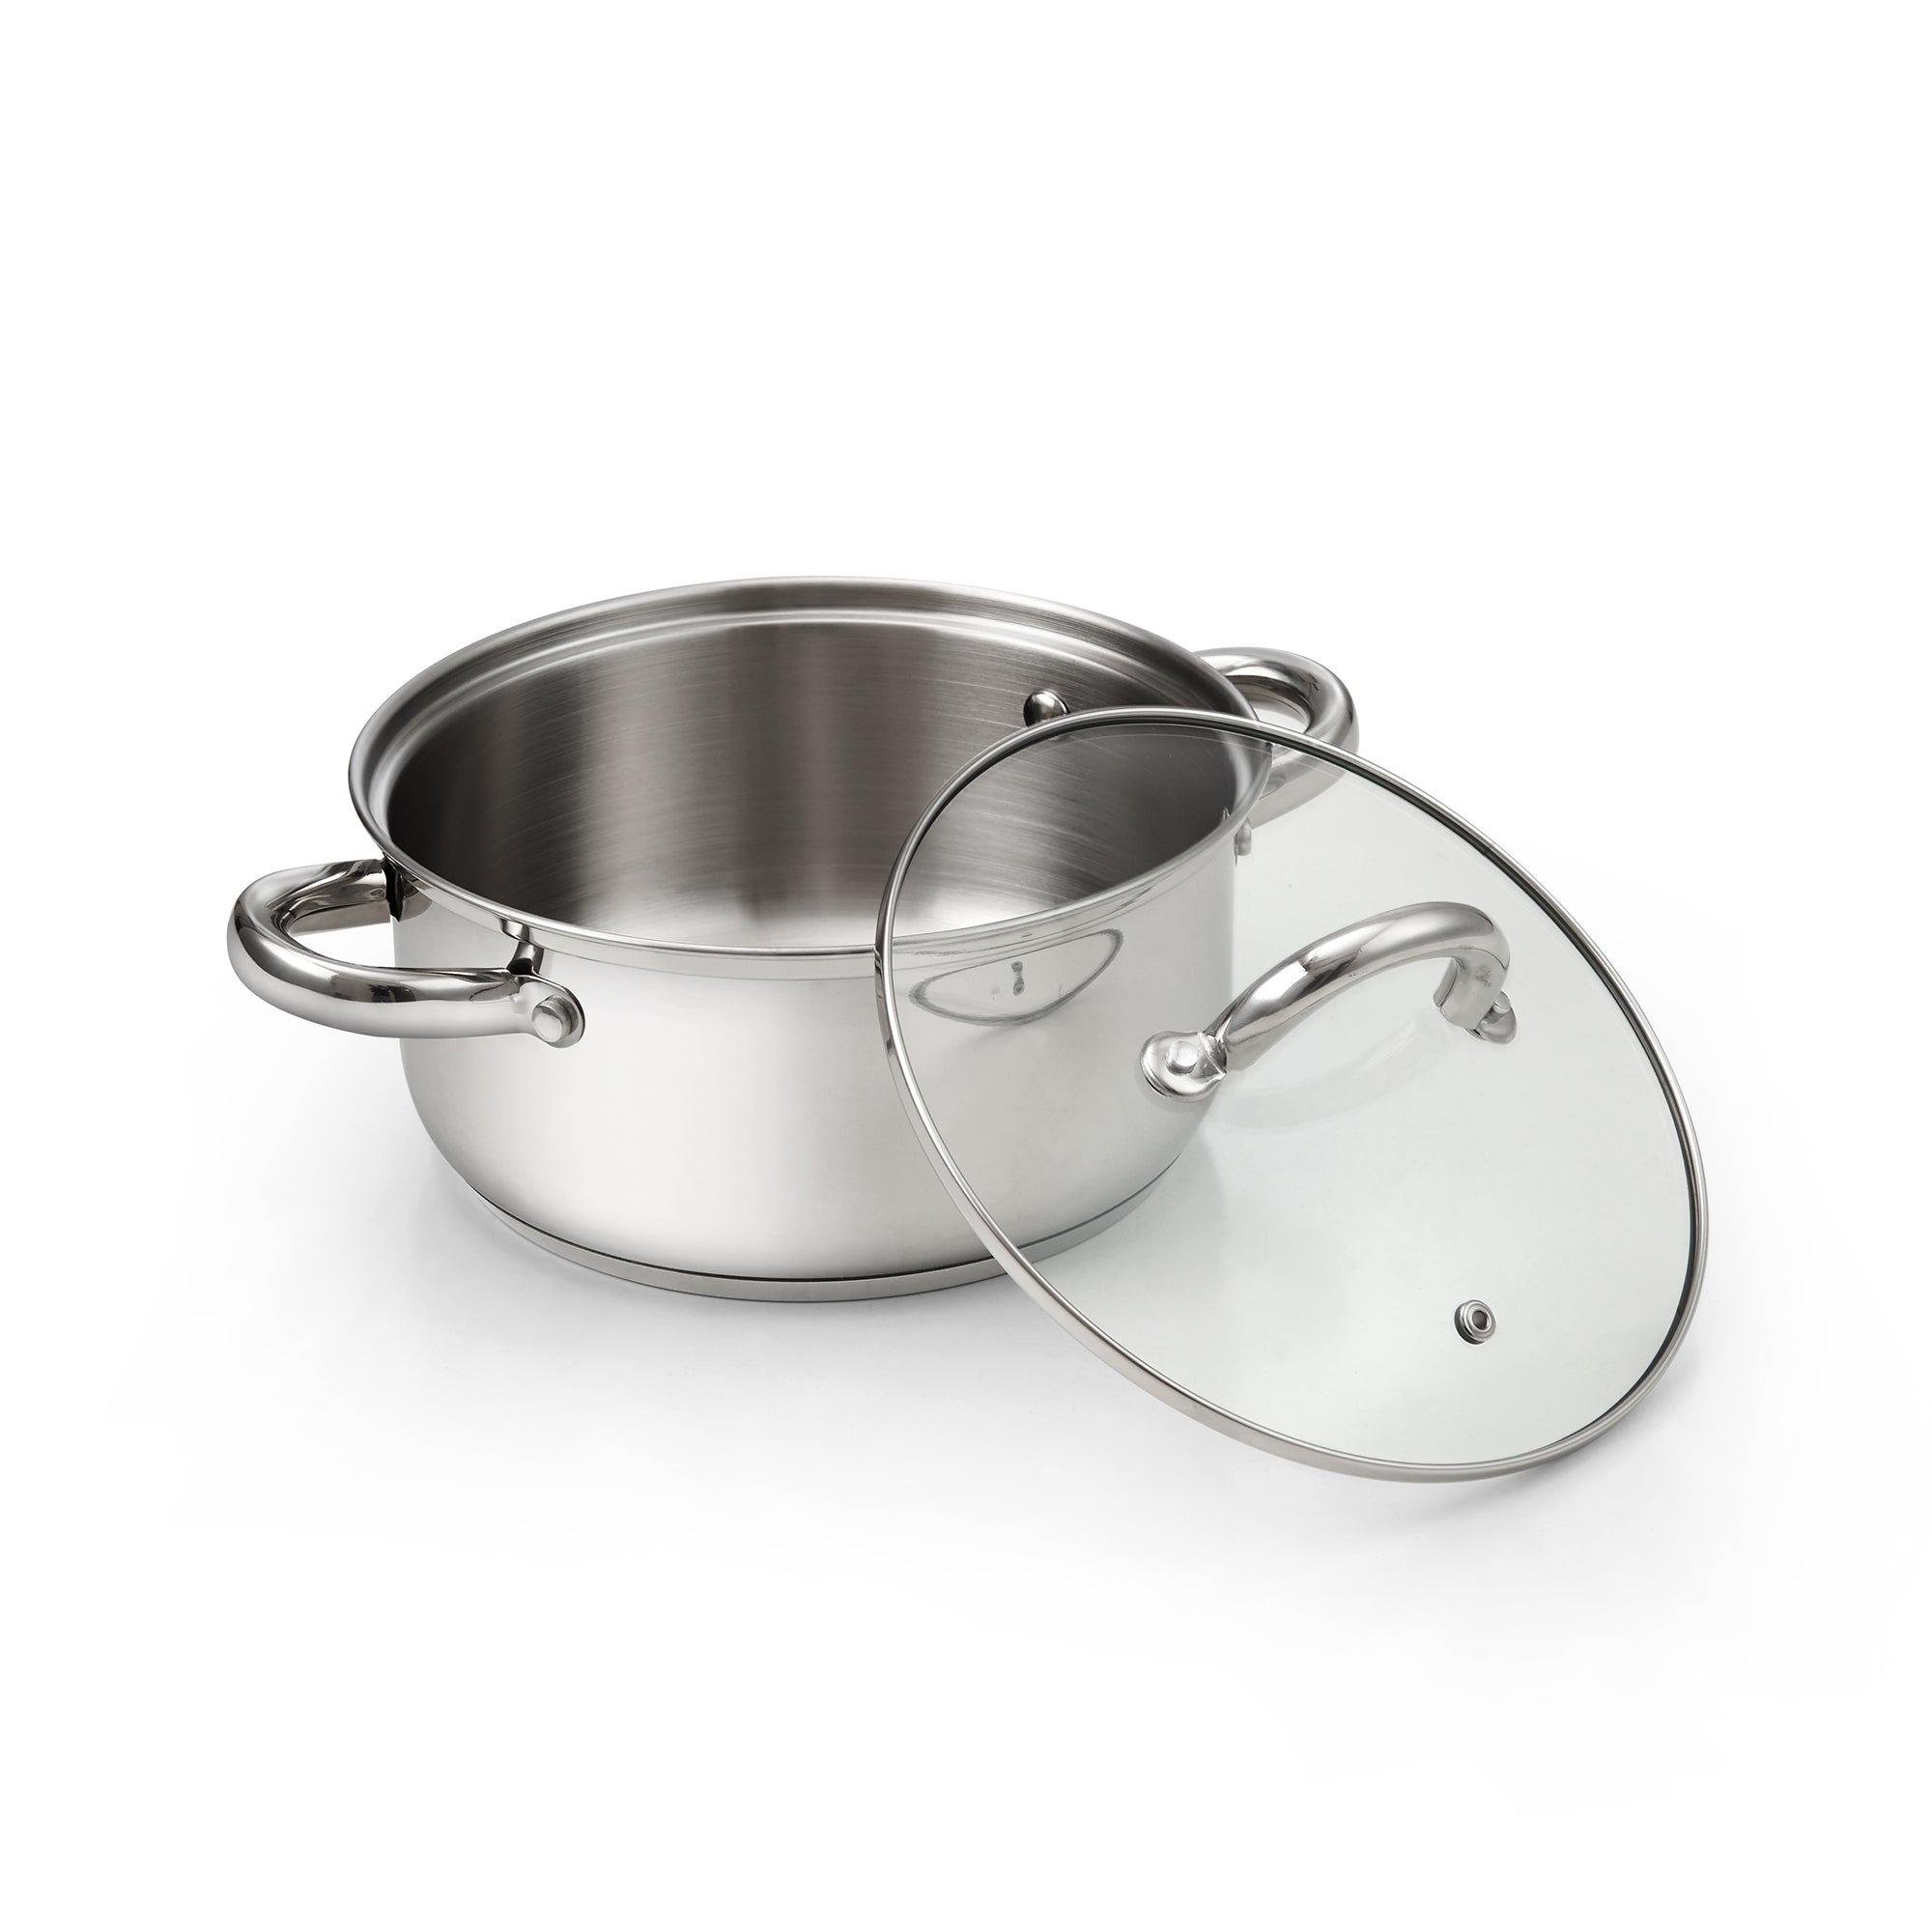 Cook N Home Stock Pot with Lid, Basics Stainless Steel Casserole